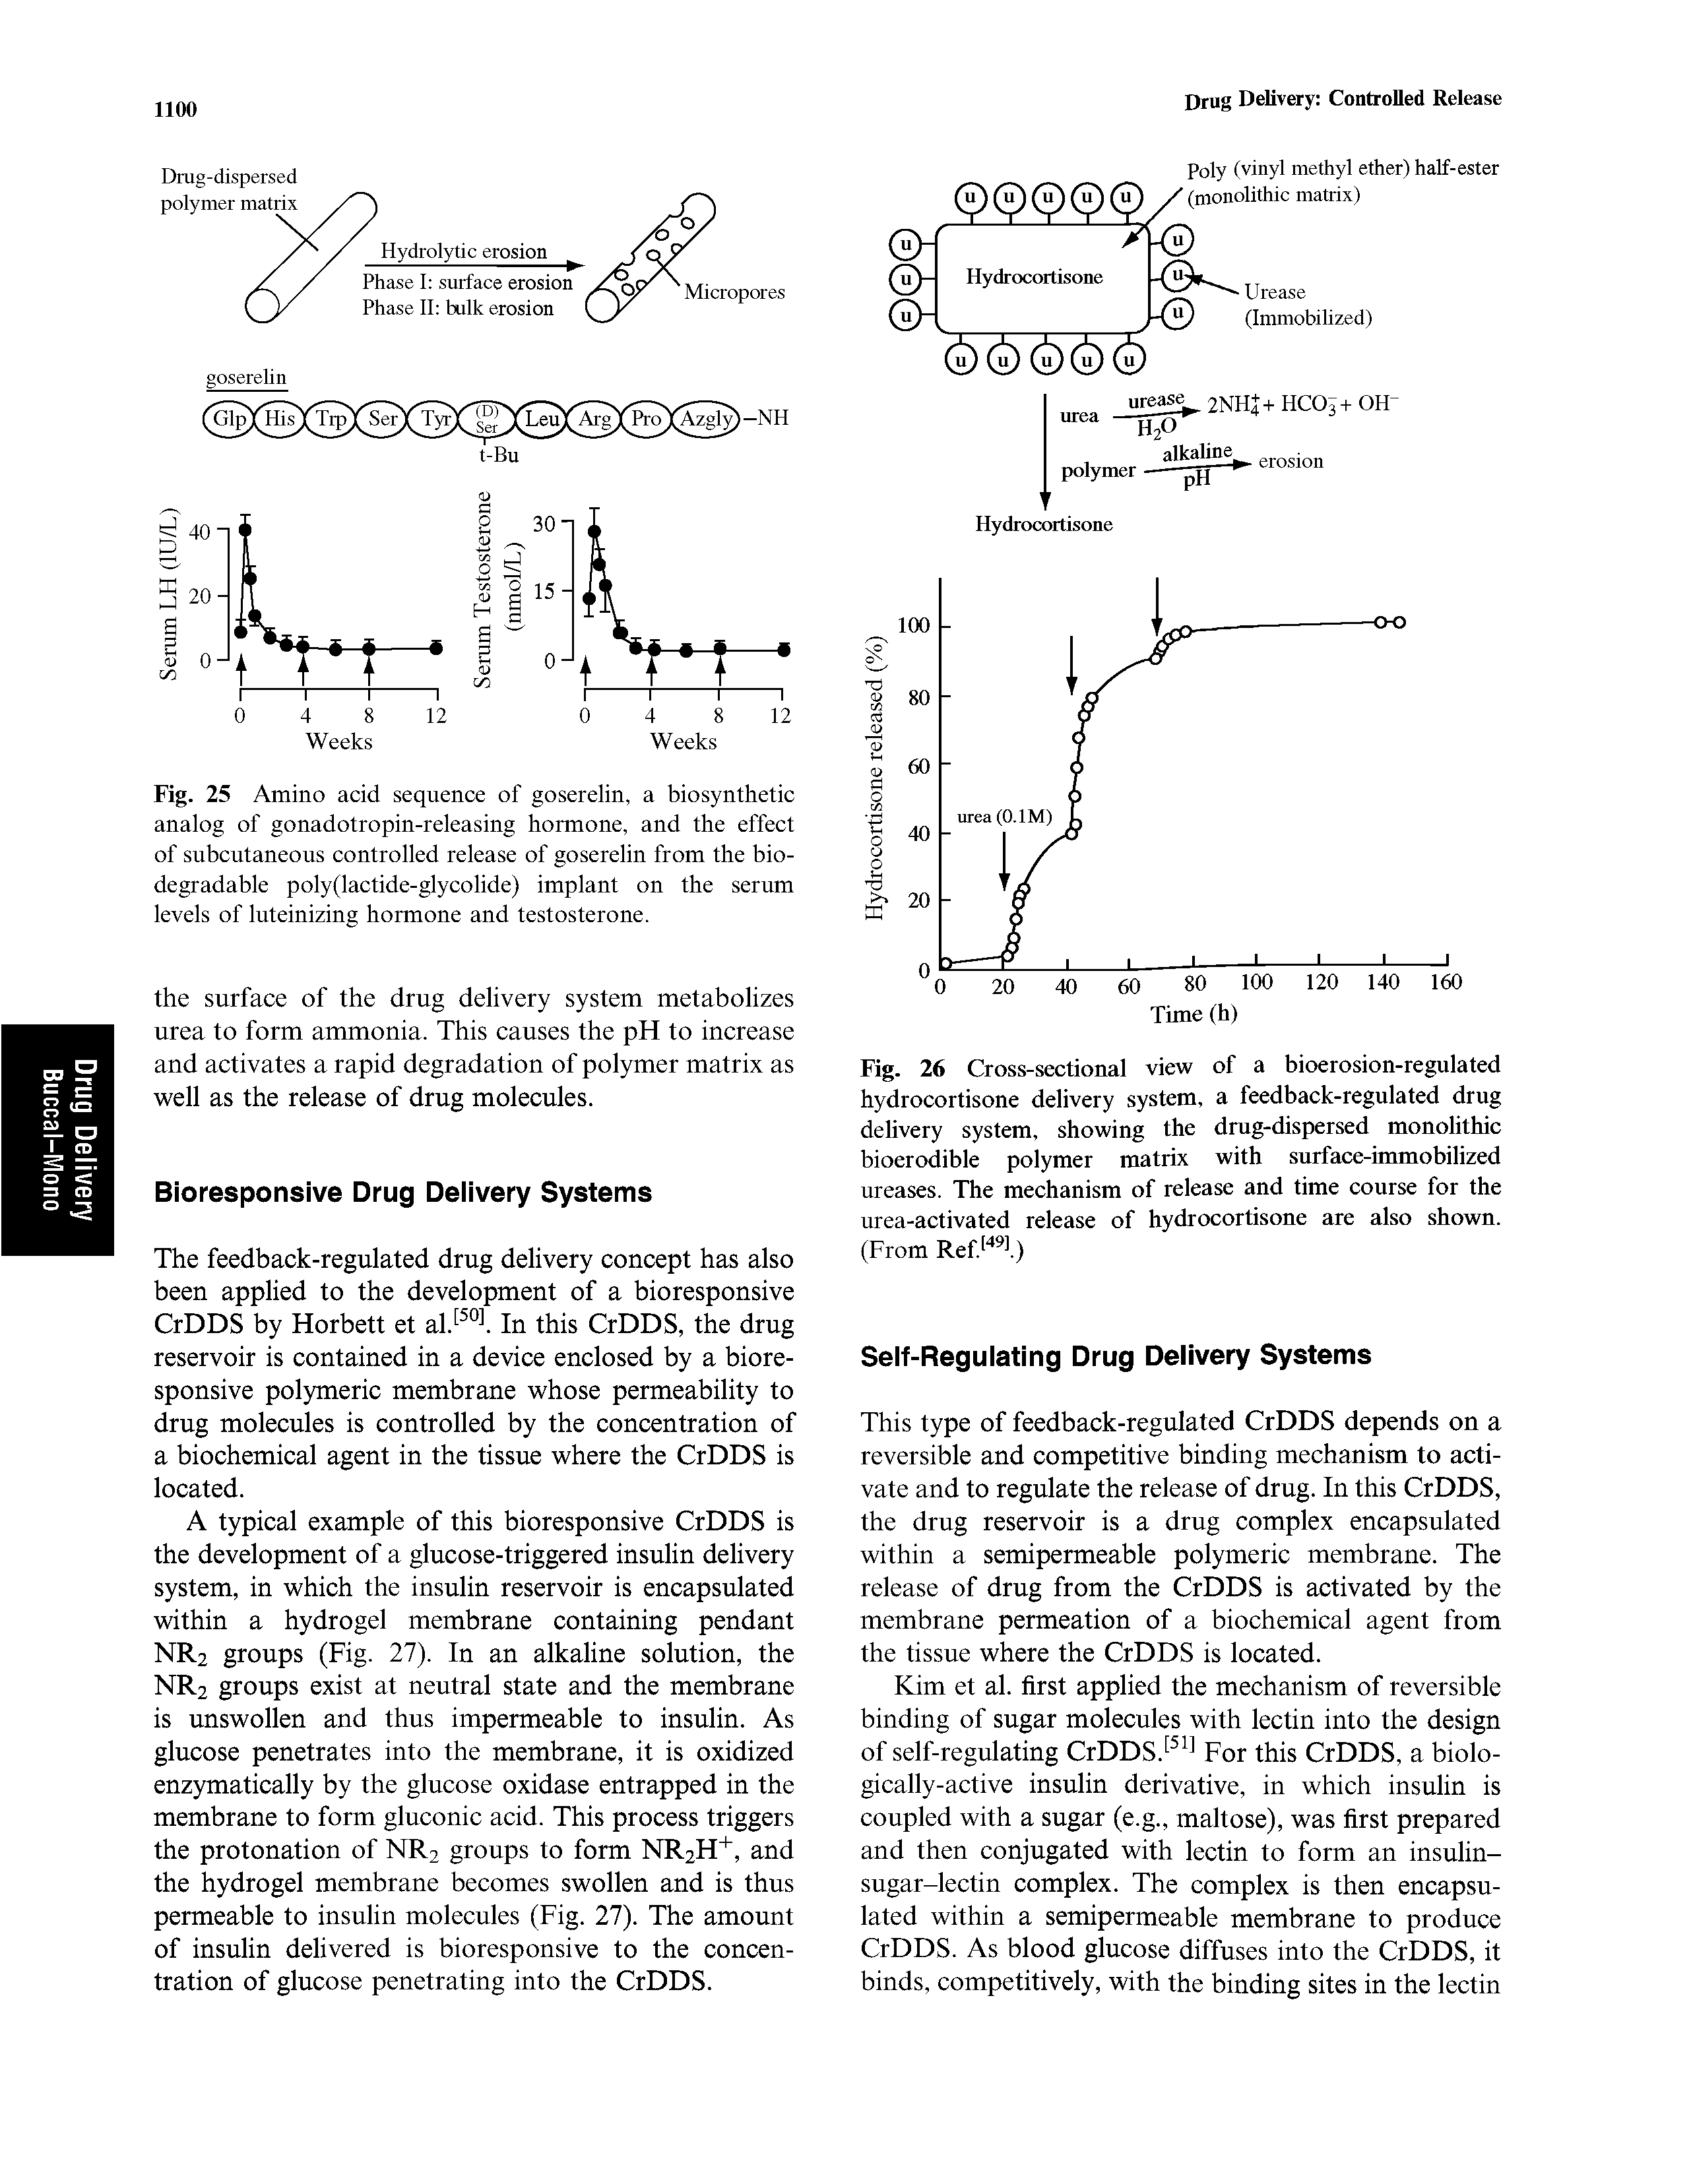 Fig. 26 Cross-sectional view of a bioerosion-regulated hydrocortisone delivery system, a feedback-regulated drug delivery system, showing the drug-dispersed monolithic bioerodible polymer matrix with surface-immobilized ureases. The mechanism of release and time course for the urea-activated release of hydrocortisone are also shown. (From Ref > 1)...